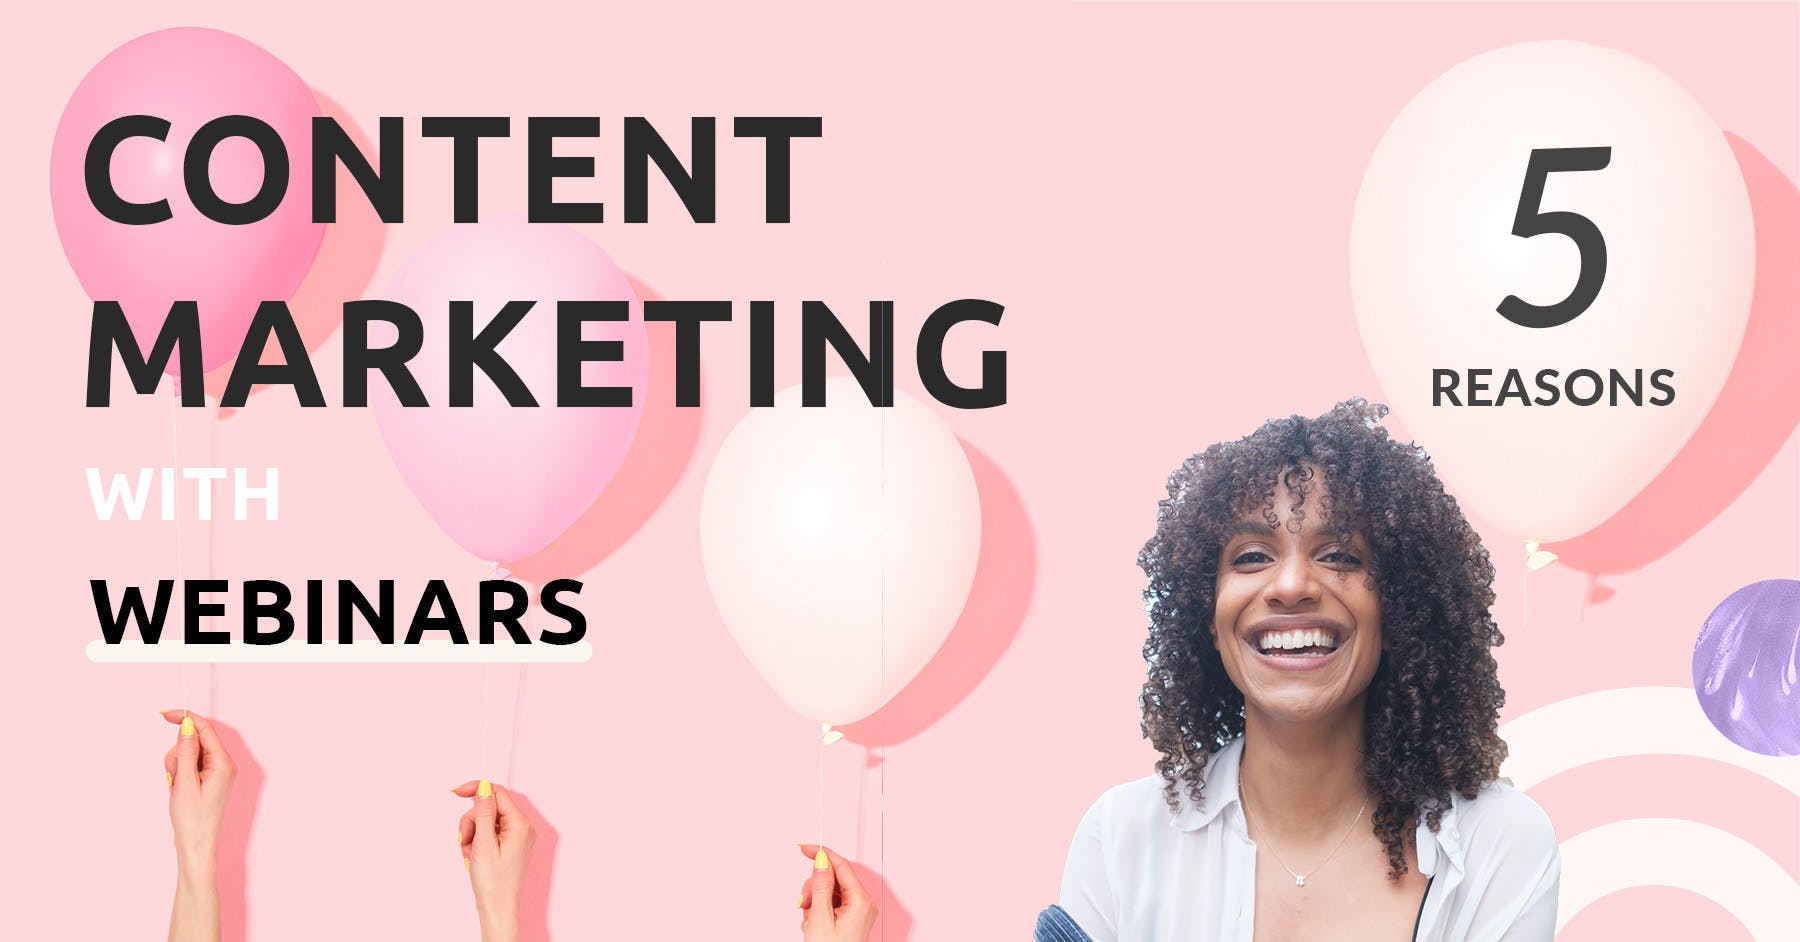 Webinars can fuel your content marketing strategy. We explore the top 5 reasons why you should use webinars and re-purpose to maximize reach. Let’s dive in!